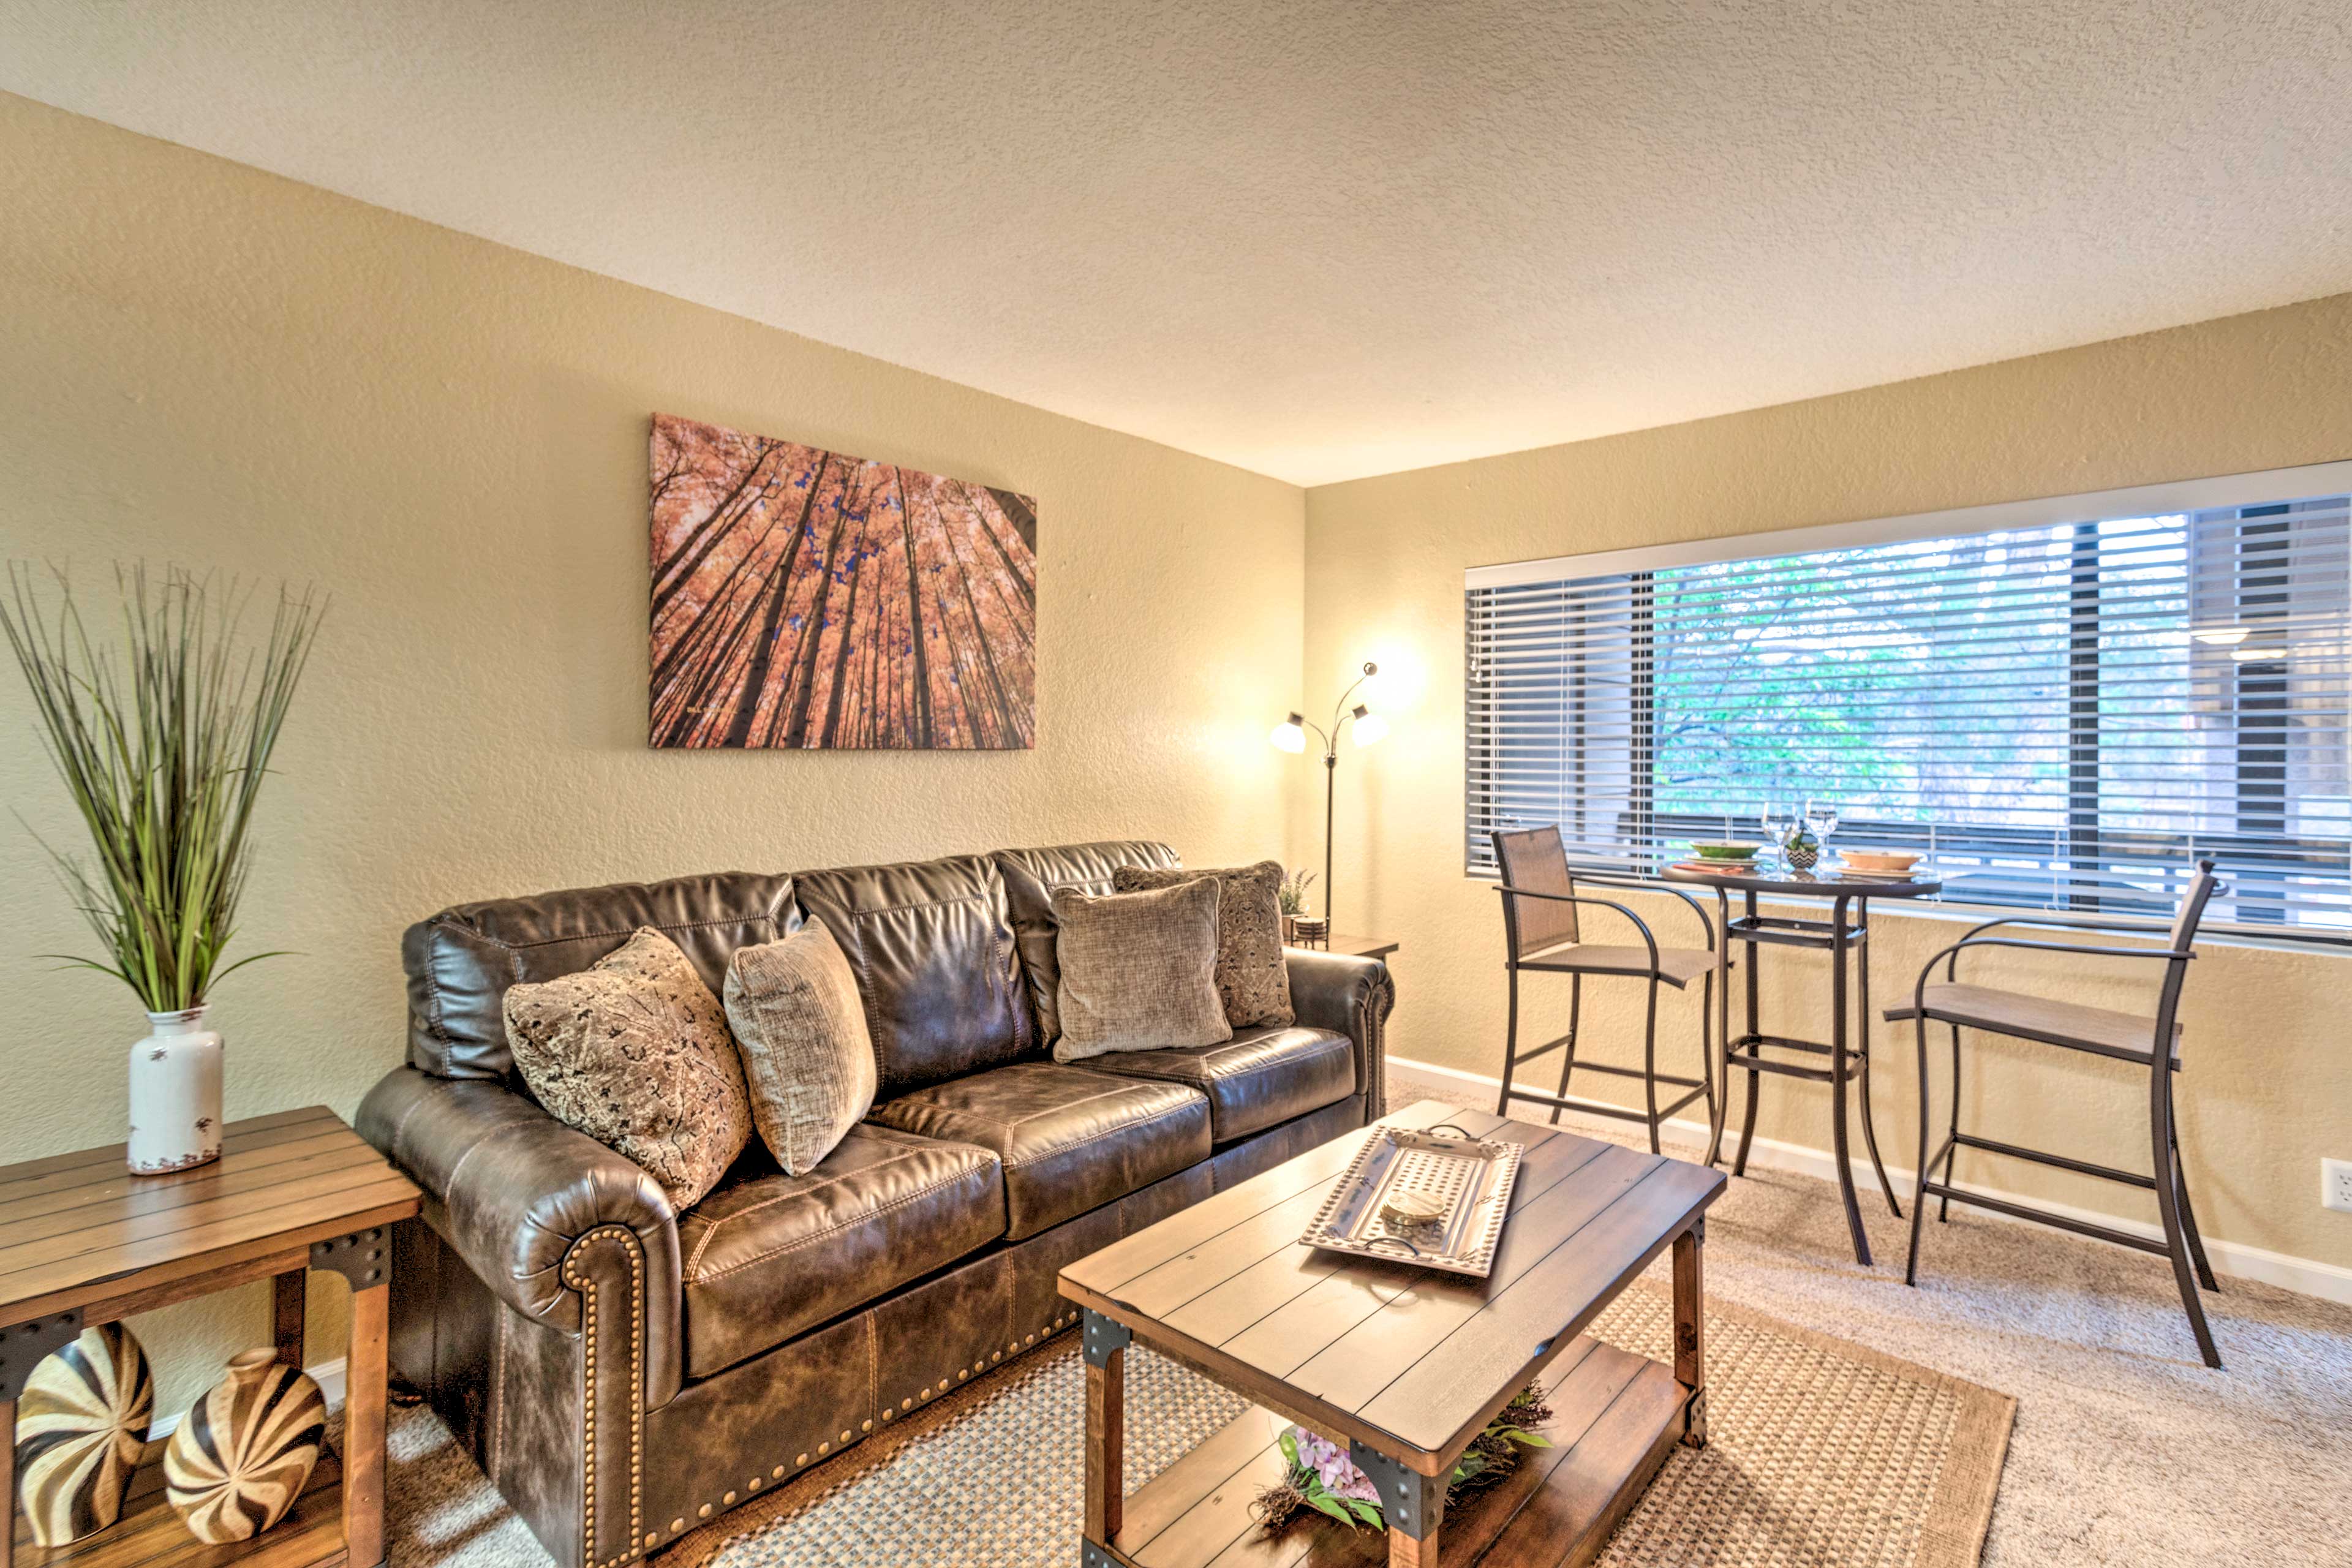 Enjoy a comfortable trip to Sedona in this well-equipped condo!